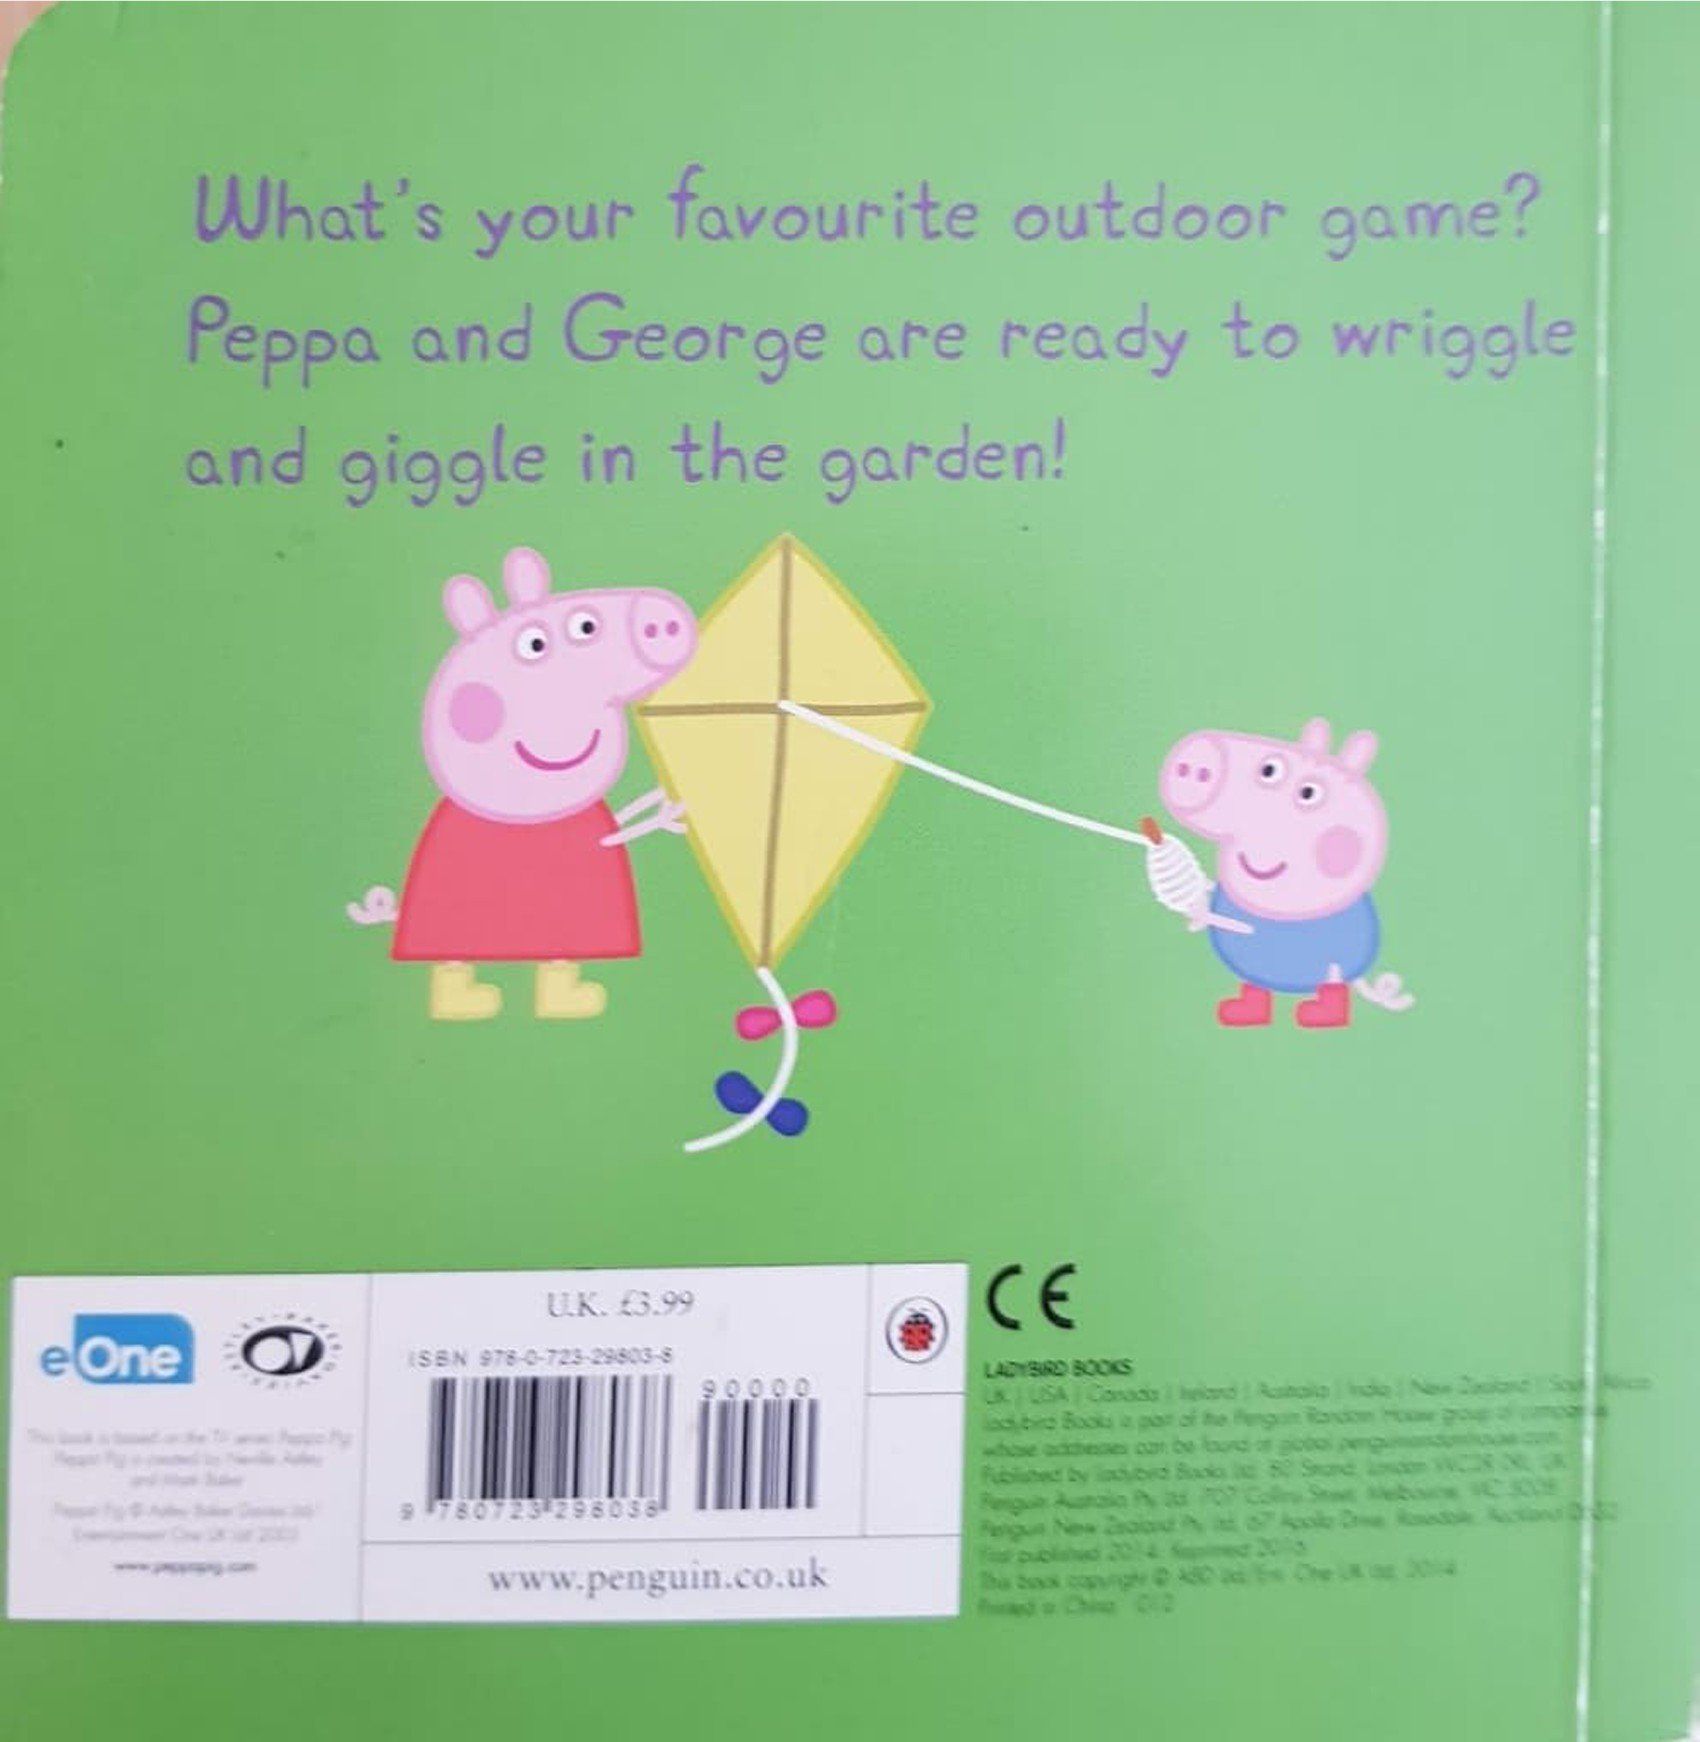 Piggy in the Middle Very Good Peppa Pig  (6203873558713)